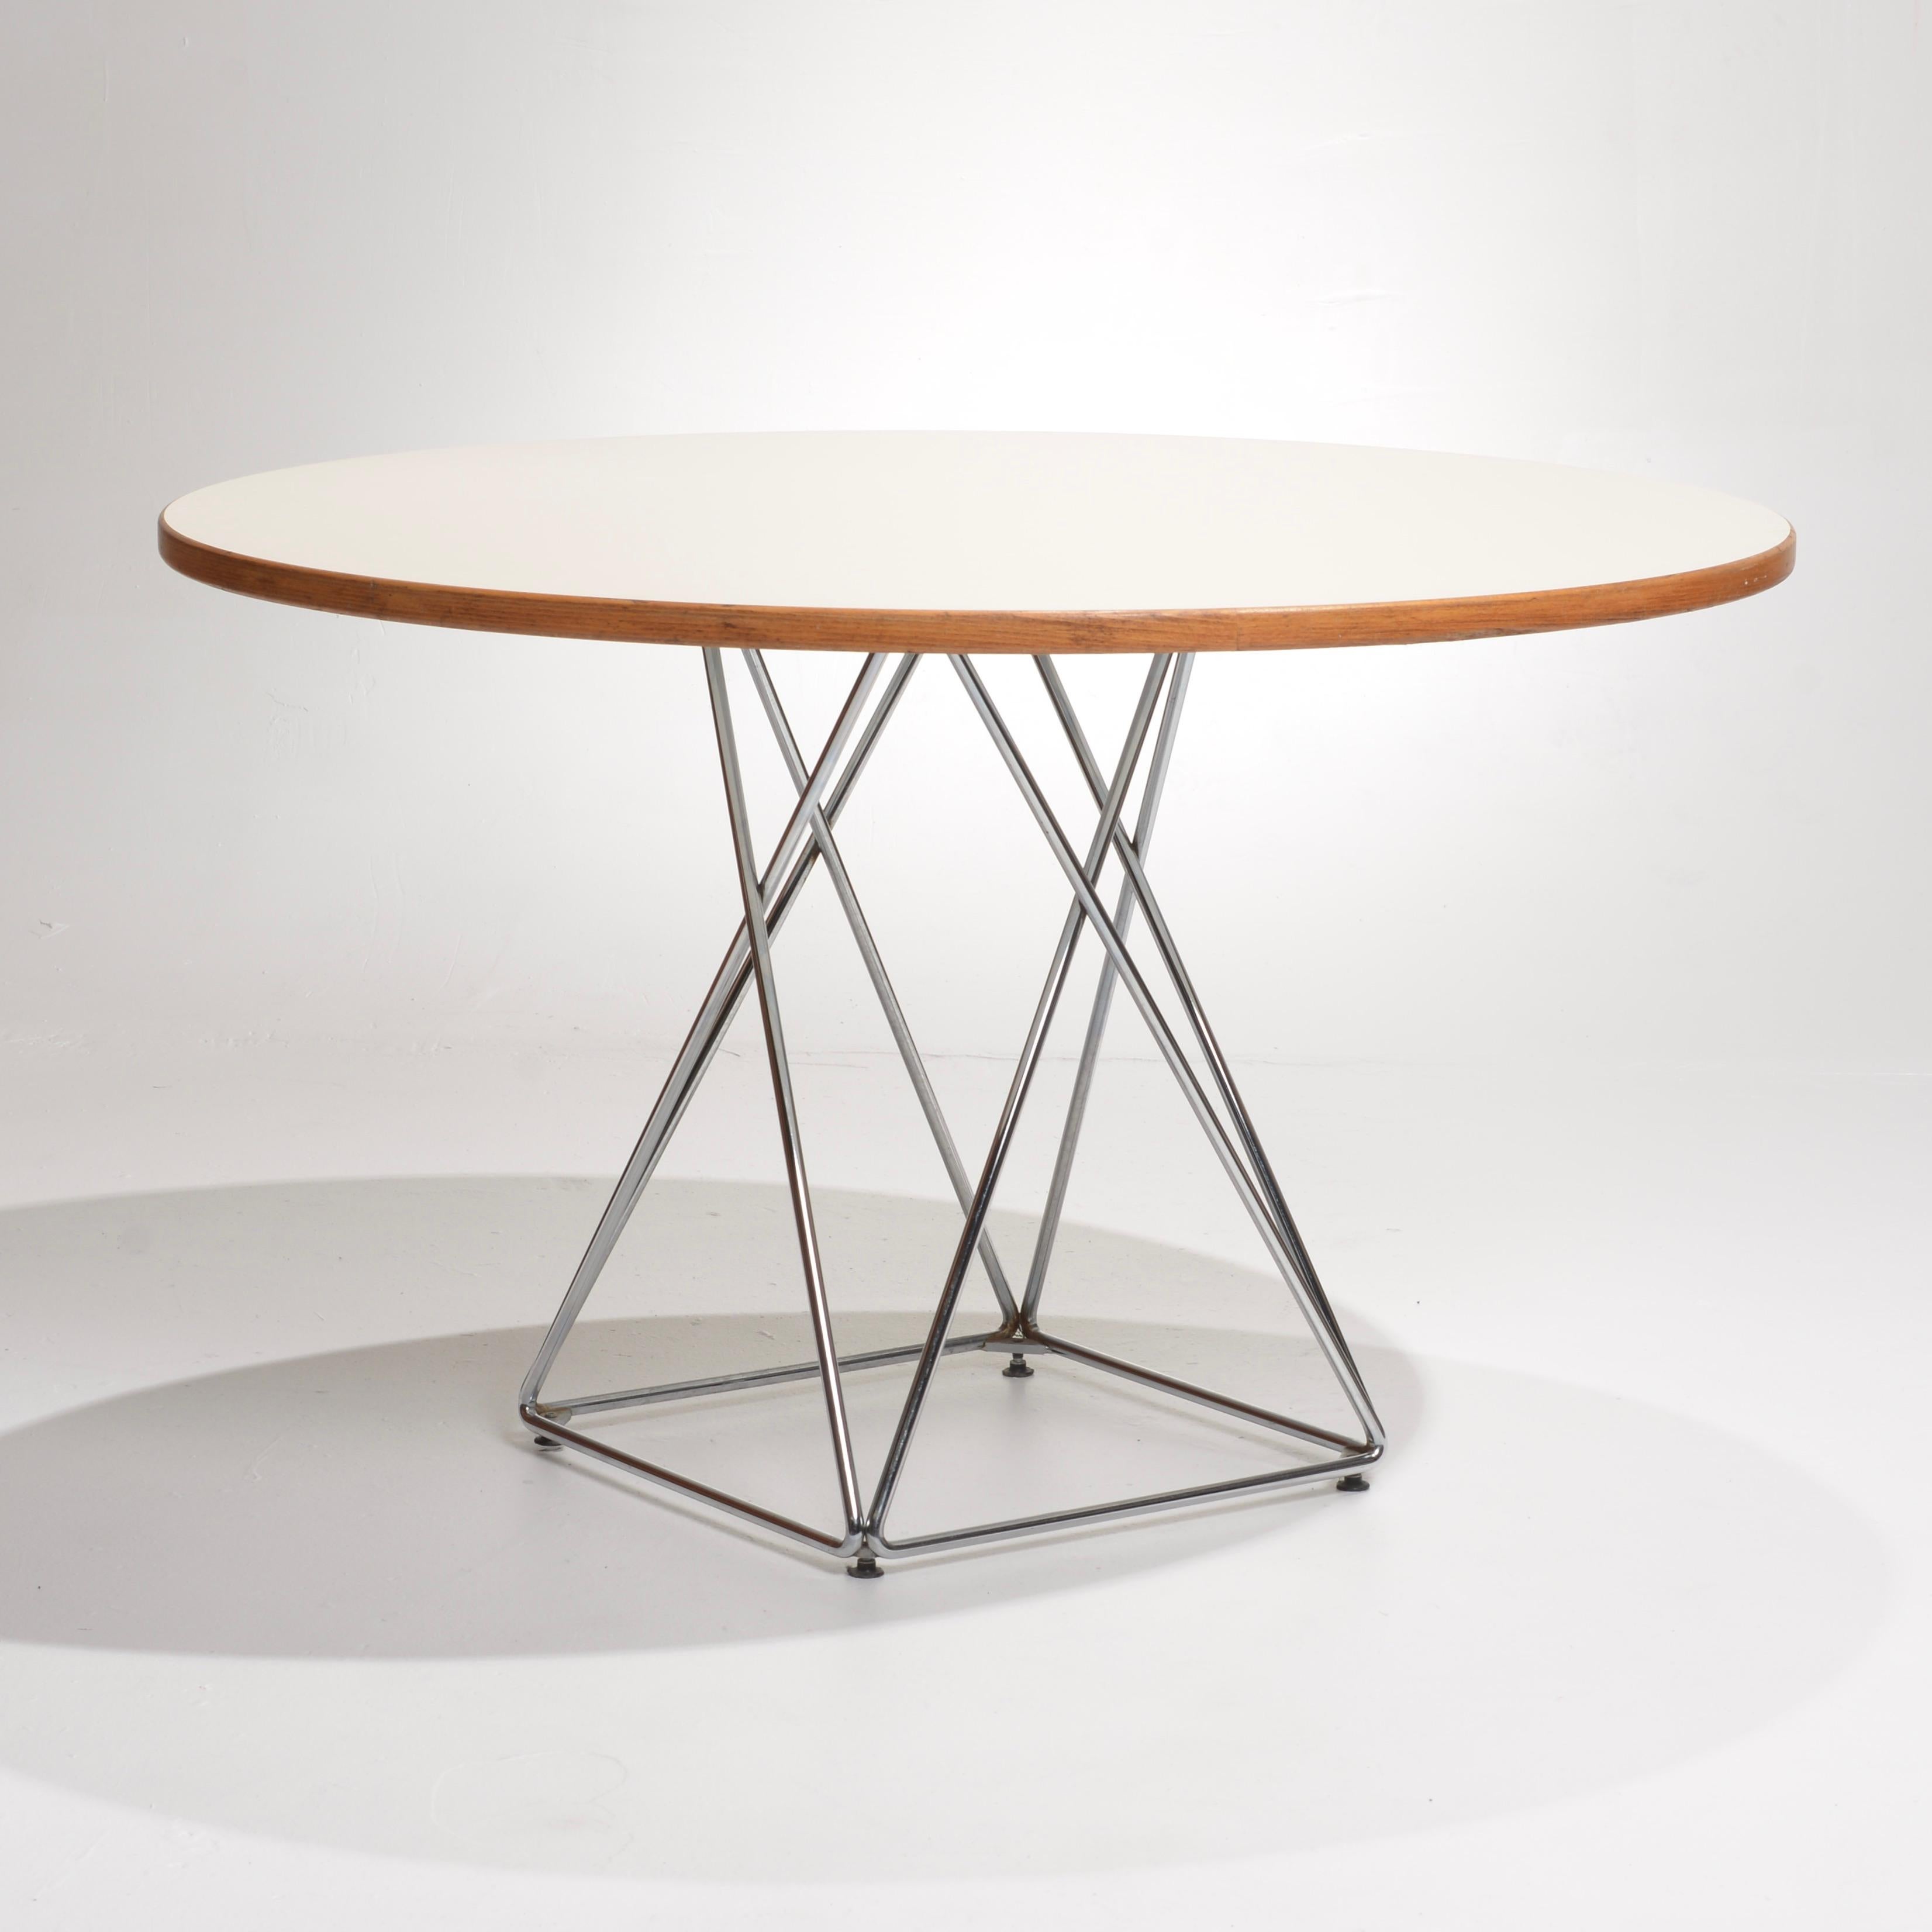 German Thonet Round Dining Table with Eiffel Base